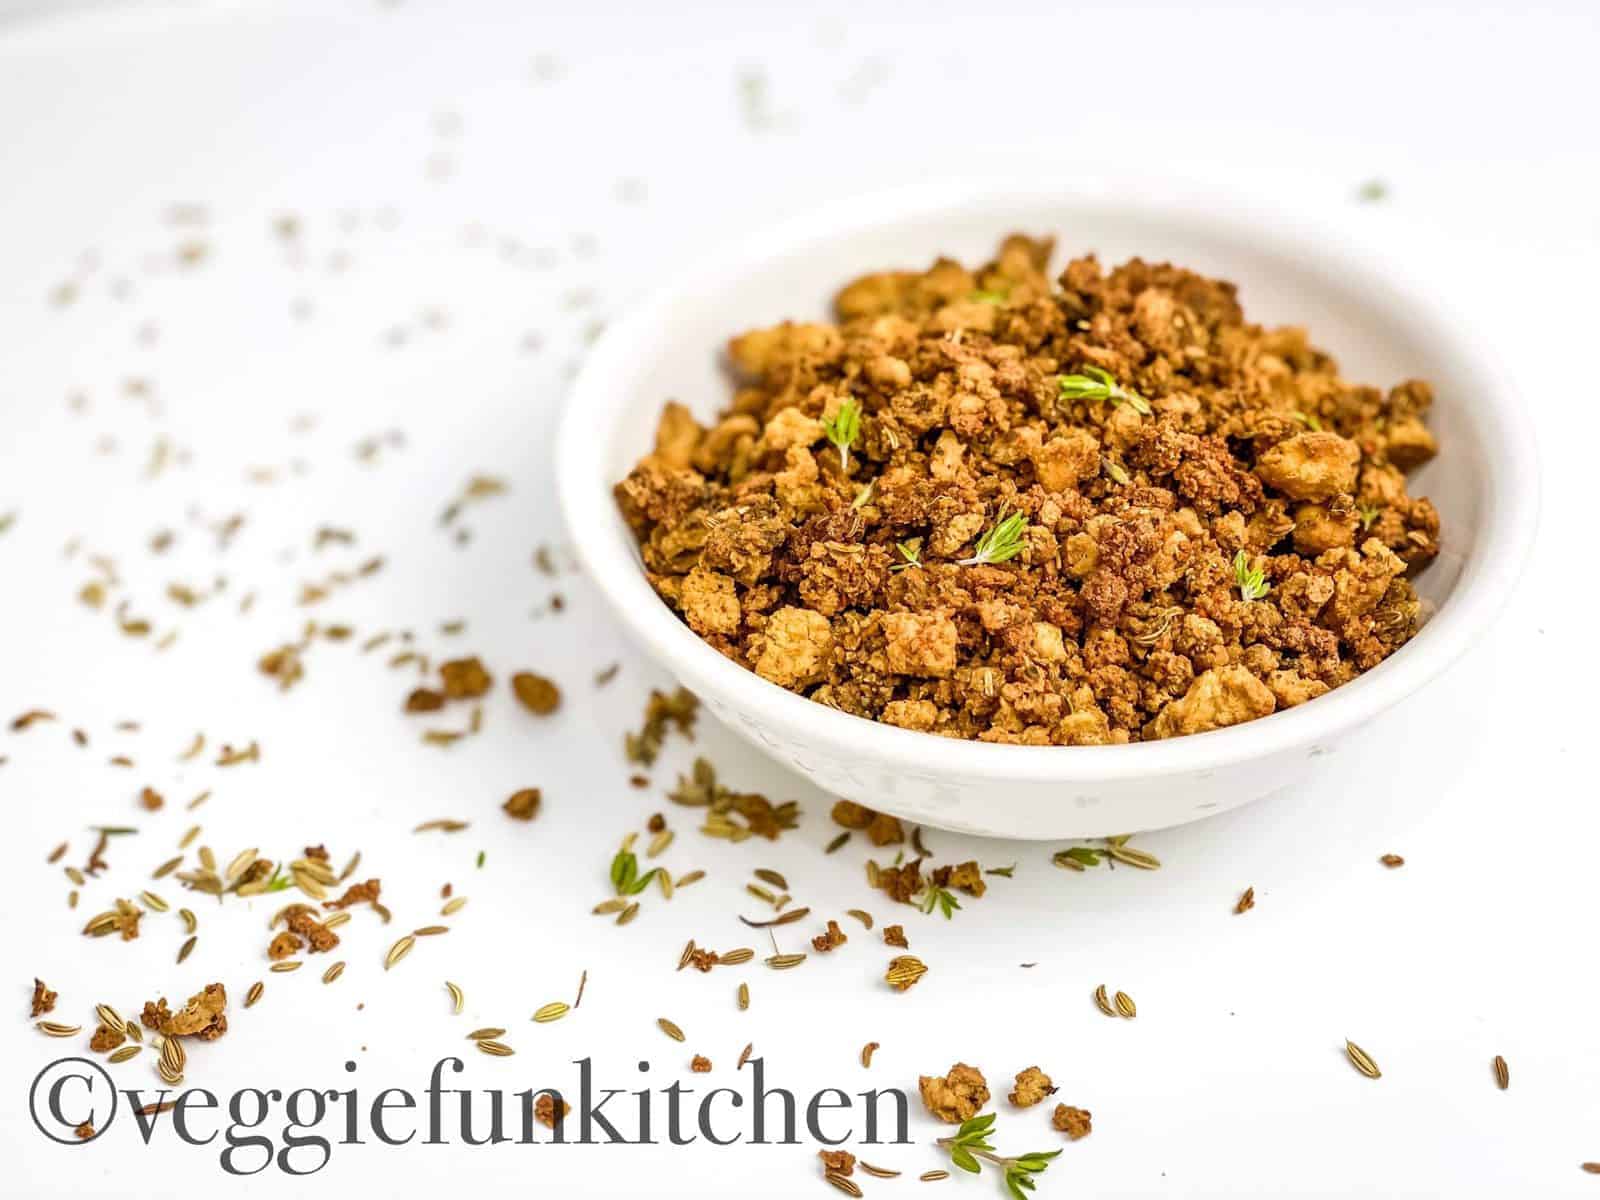 Vegan Italian Sausage Crumble from Planet Based Foods